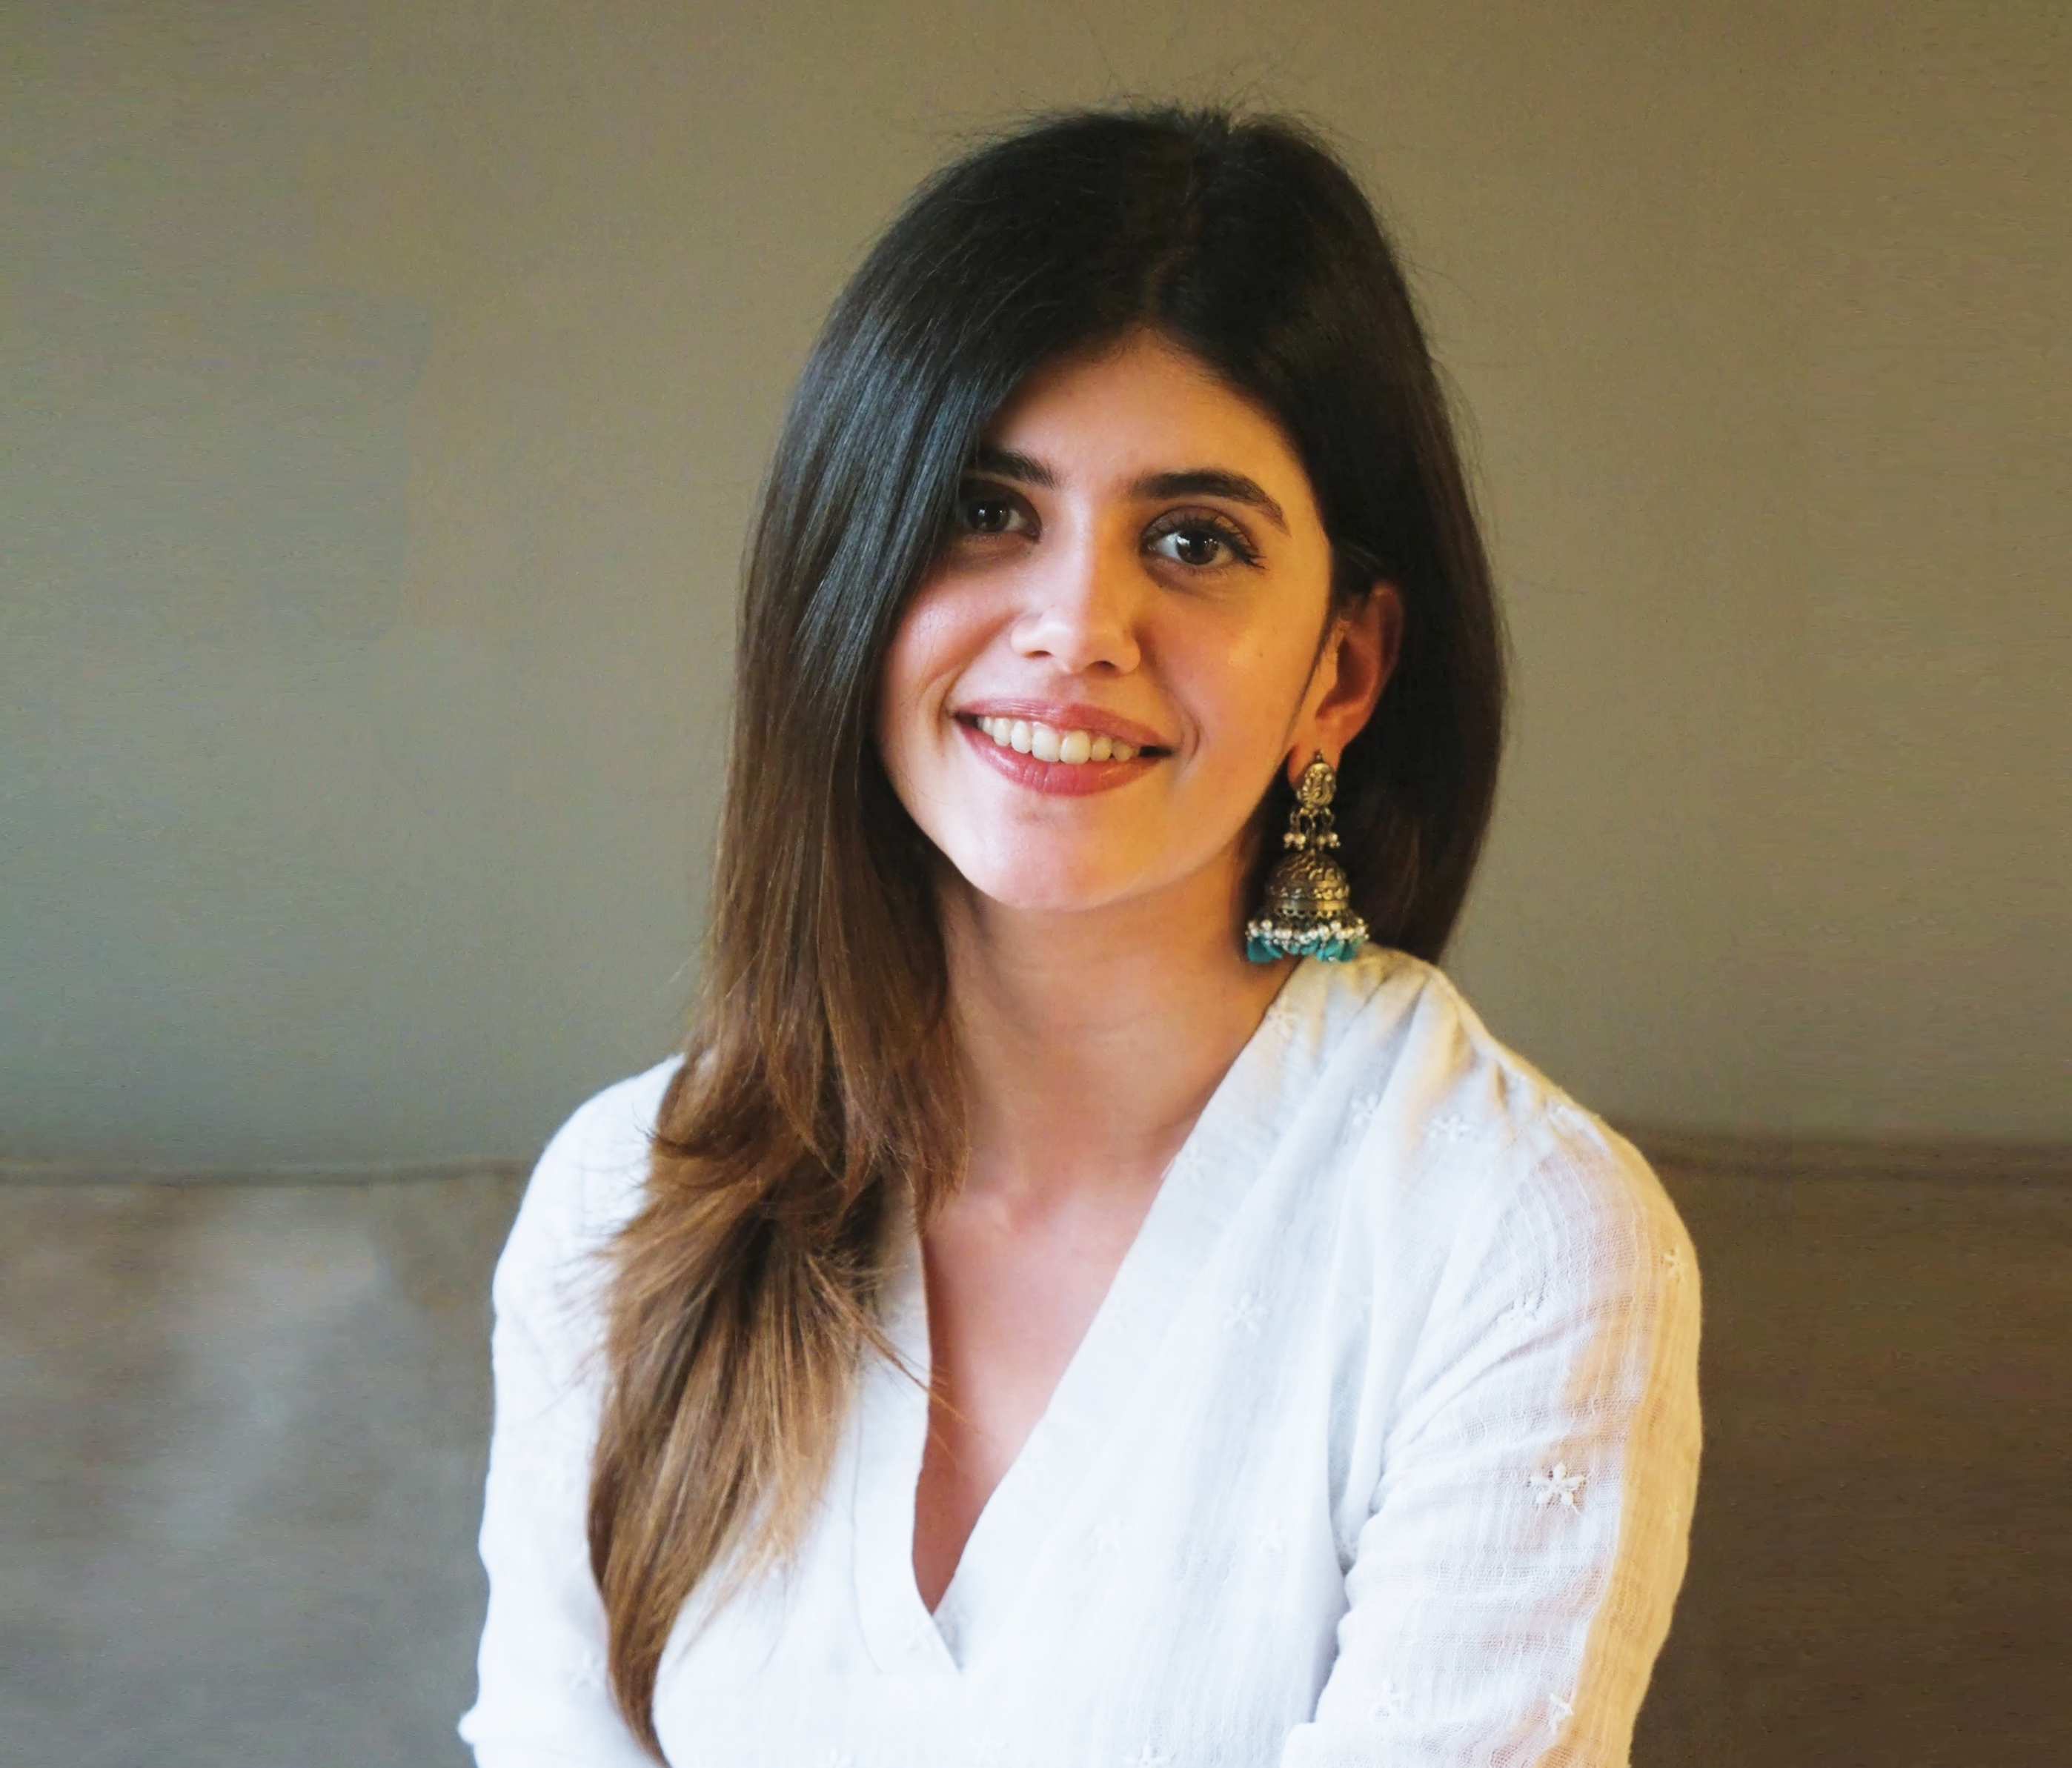 Sanjana Sanghi is partnering with UNDP India to promote youth-led social innovation and entrepreneurship 